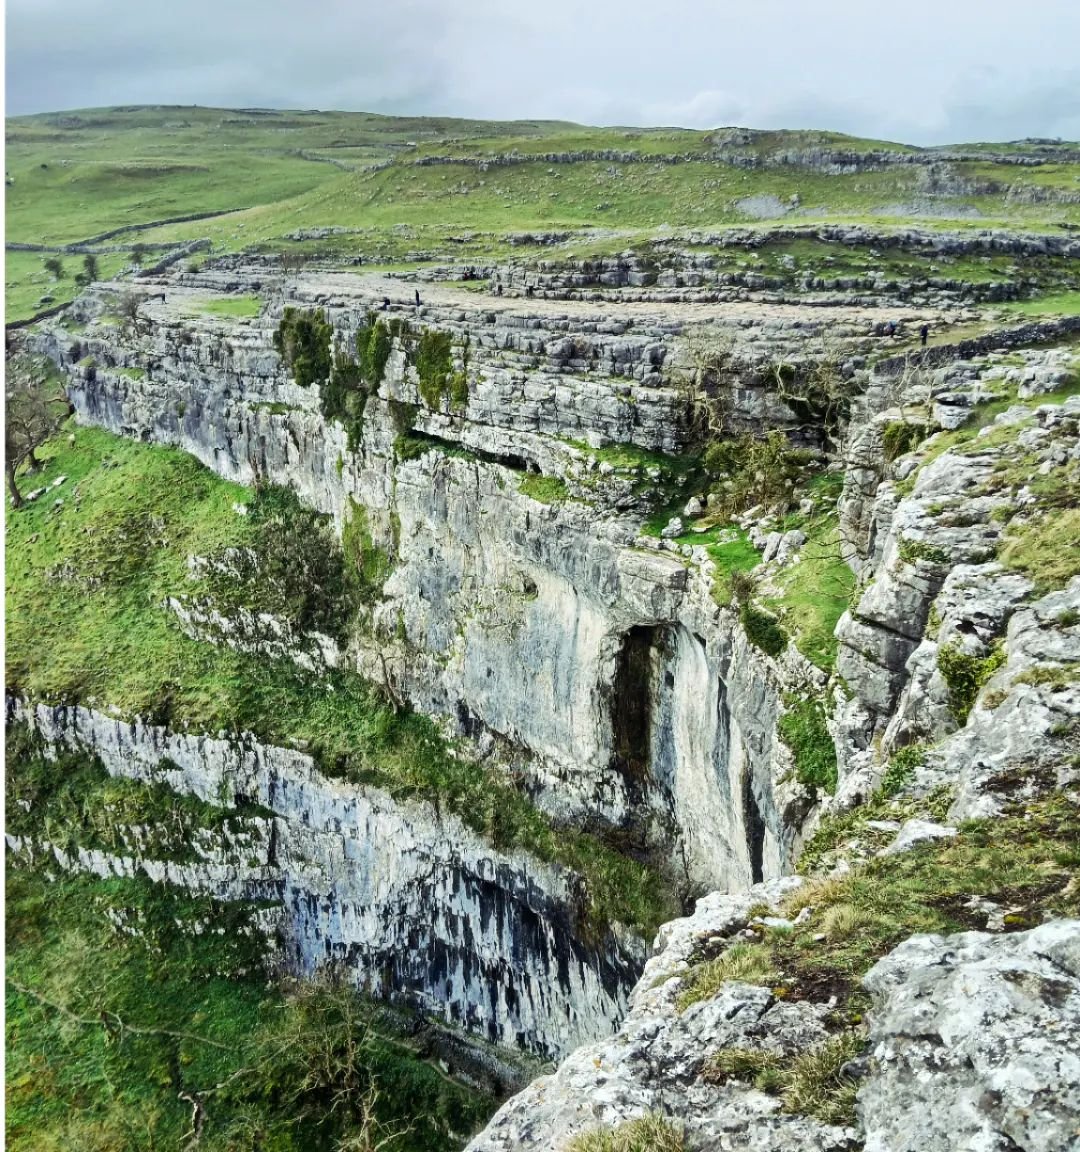 Malham Cove 
I spent the weekend walking the wonderland of dales and scars and fosses. It's a place I spent alot of time when I was first getting into the outdoors and it holds some really special memories.  Felt really privileged to be back, teachin